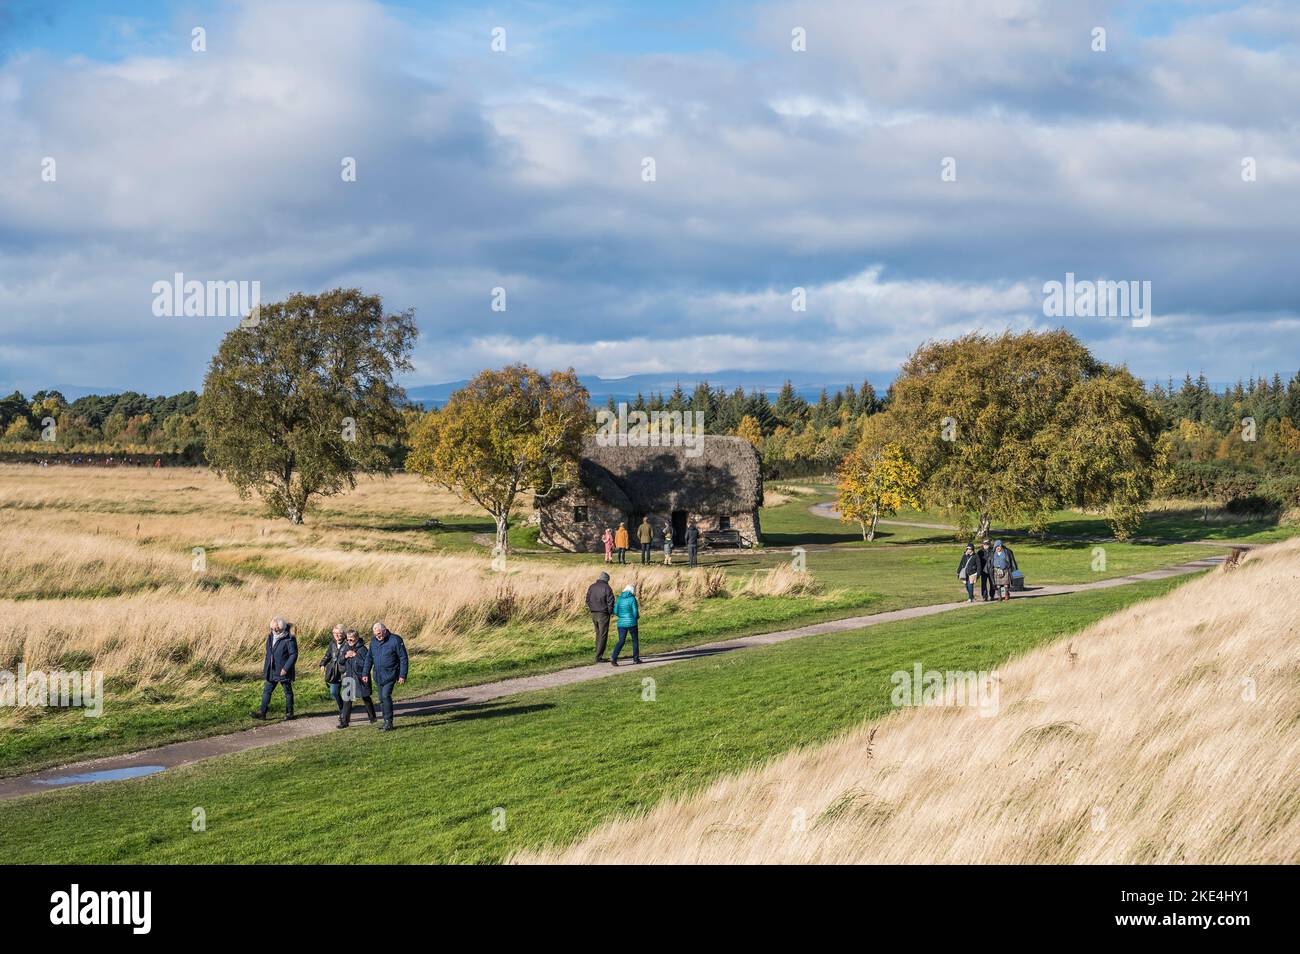 The image is of tourists at the Culloden Moor battlefield site near Inverness, where in 1746, Bonnie Prince Charley lost his battle with the English Stock Photo